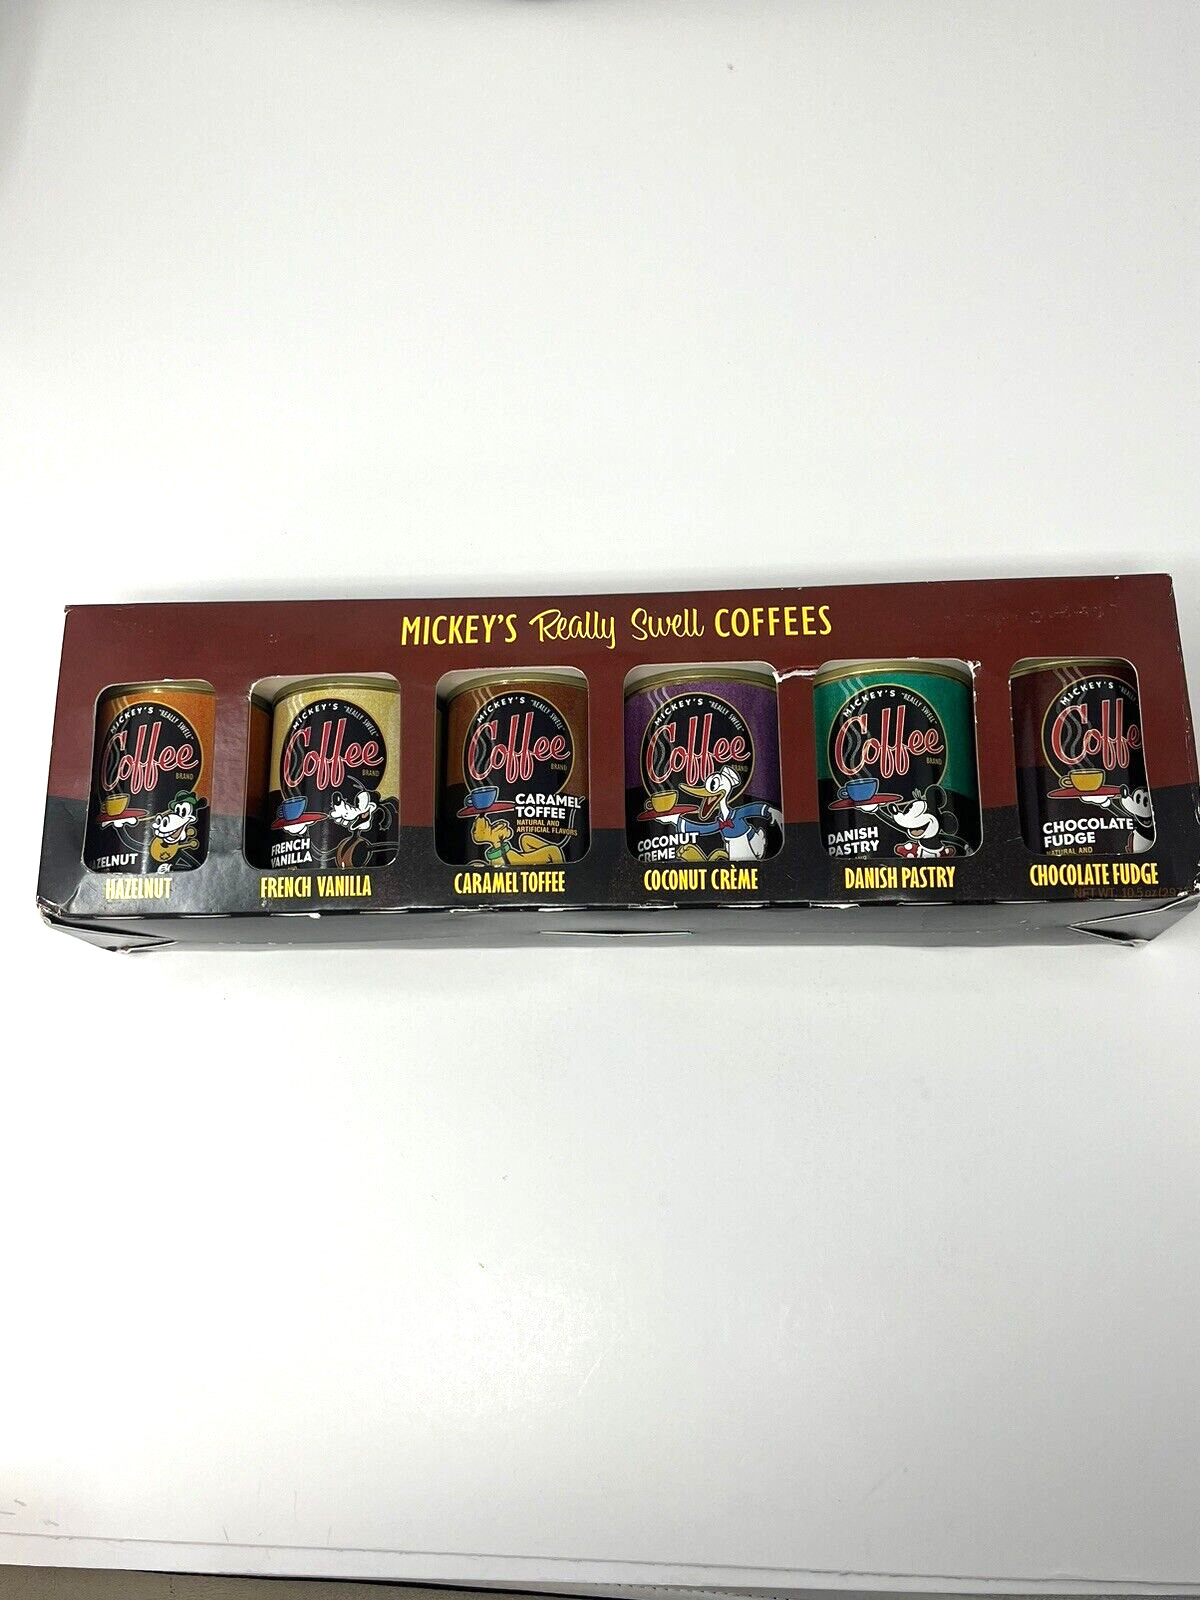 New Vintage Disney World Mickey's Really Swell Coffee 6 Can Gift Pack 1.75 Oz